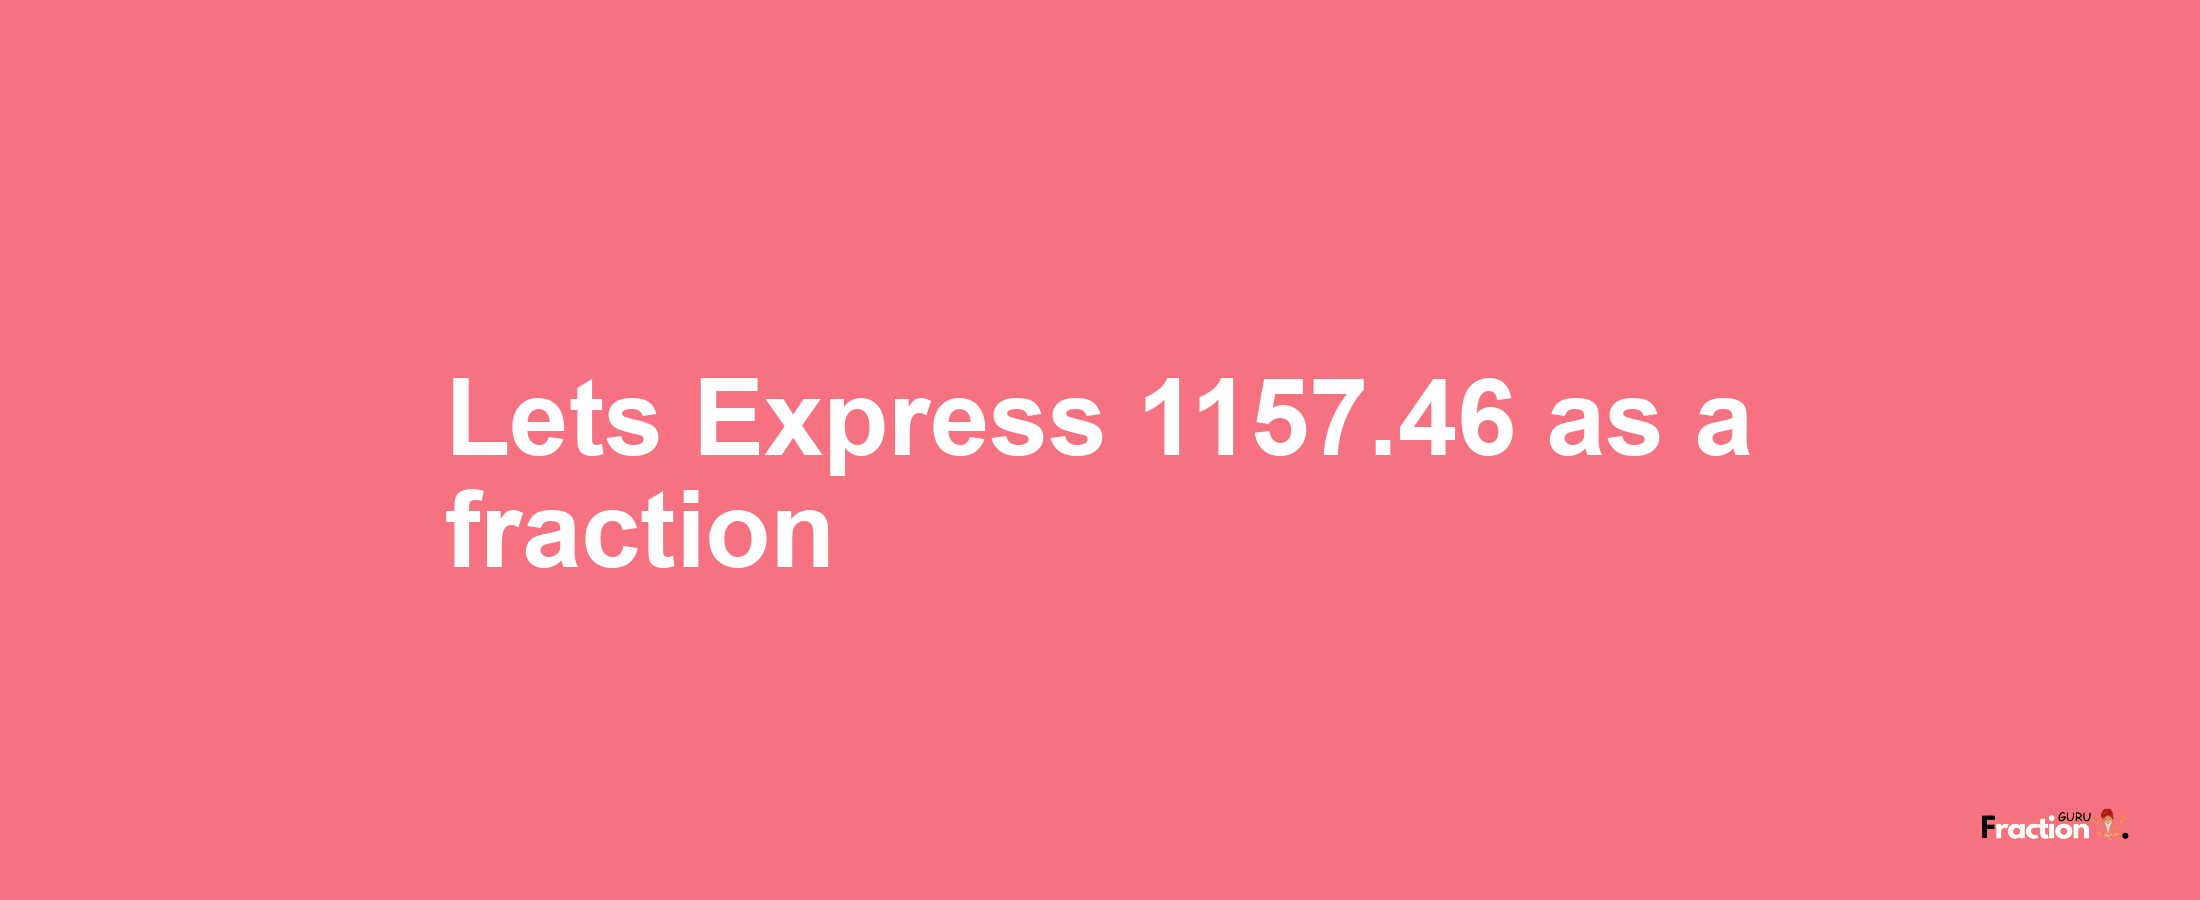 Lets Express 1157.46 as afraction